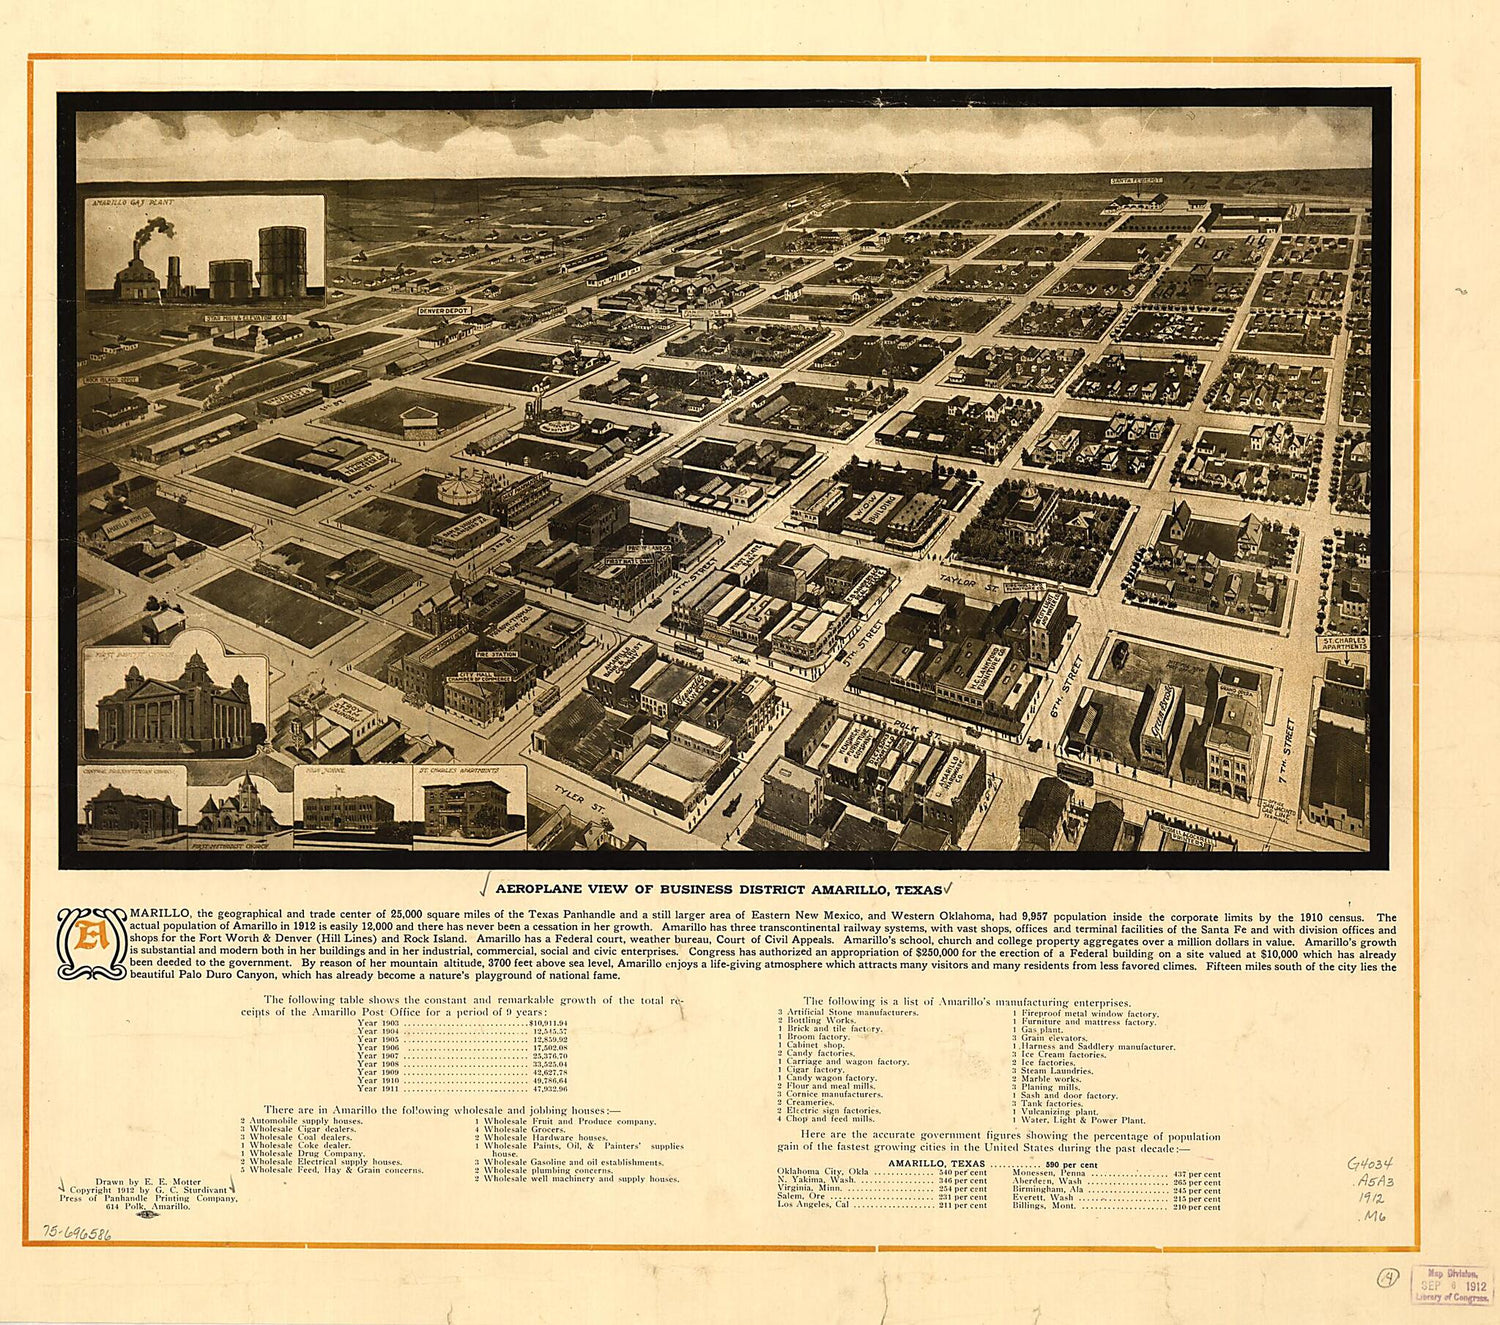 This old map of Aeroplane View of Business District Amarillo, Texas from 1912 was created by E. E. Motter,  Panhandle Printing Company, G. C. Sturdivant in 1912